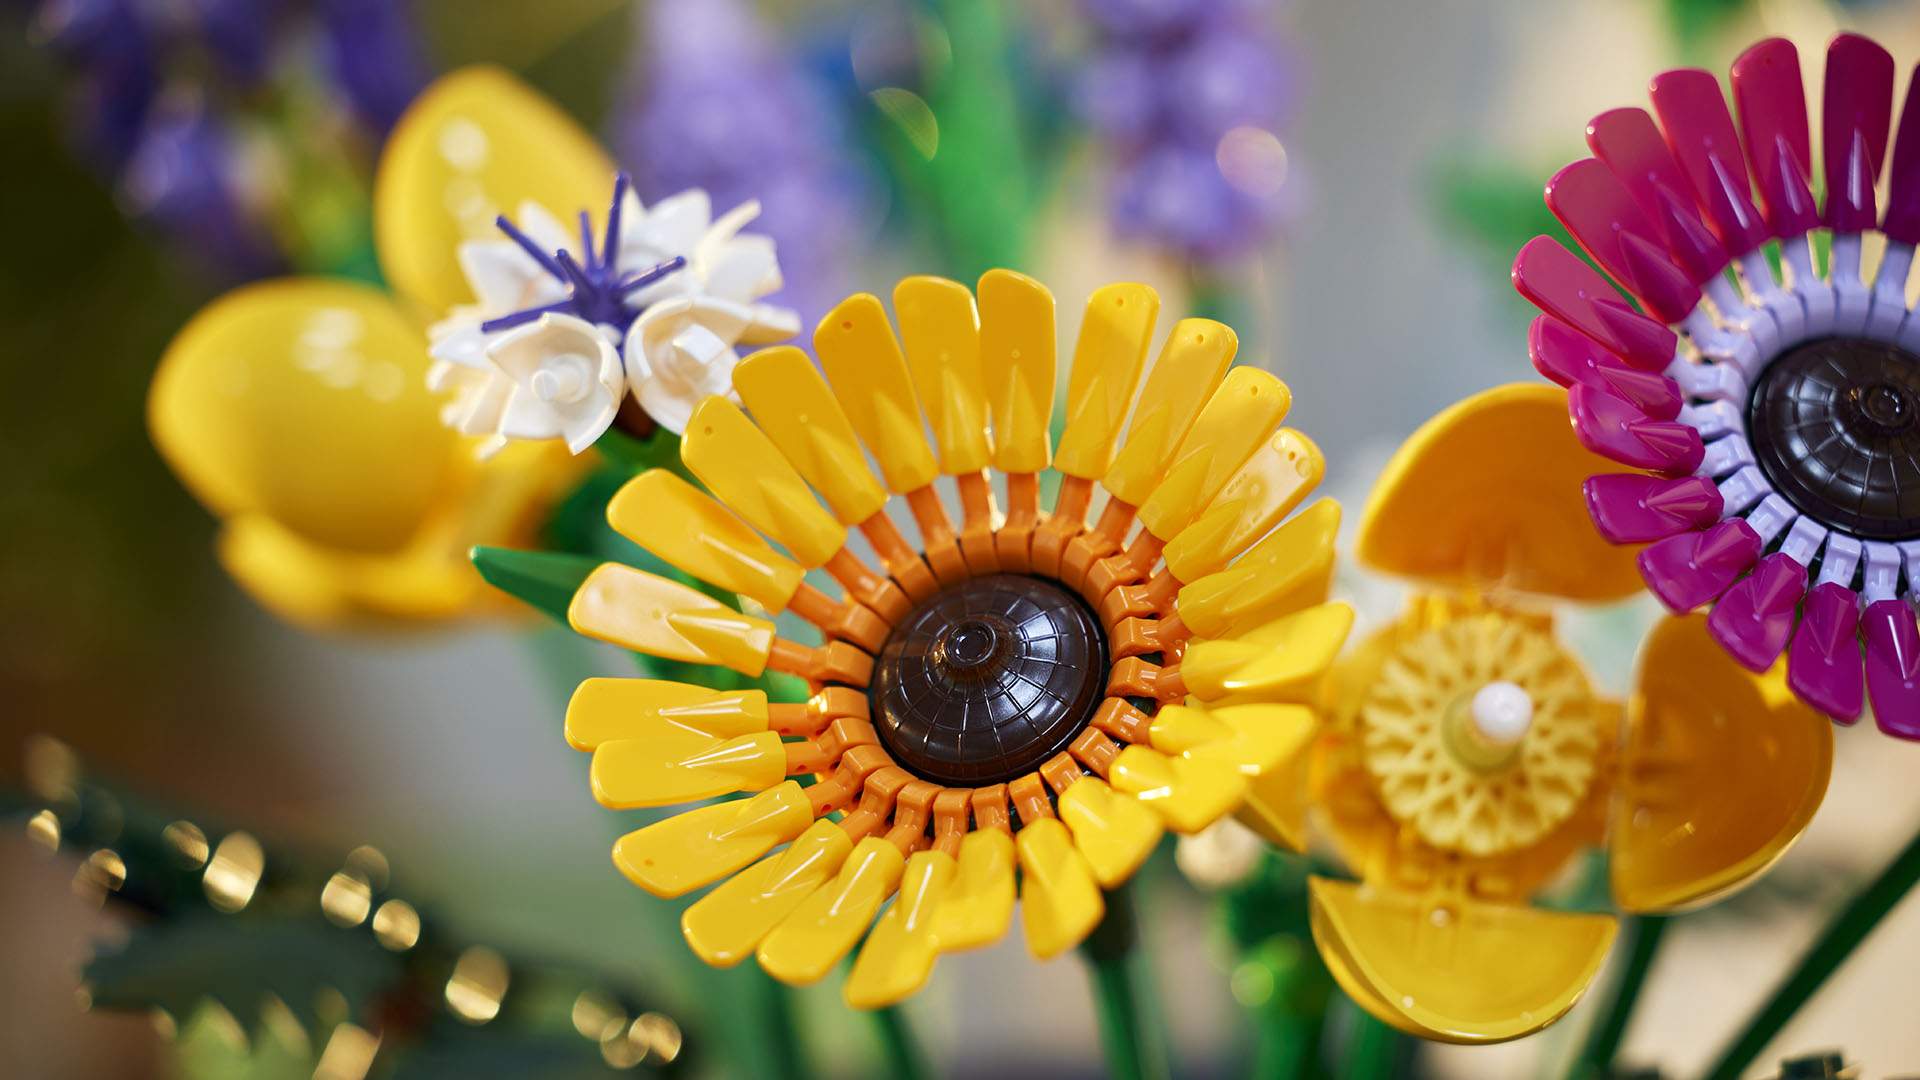 Lego's New Gorgeous Floral Kits Will Let You Fill Your Home with Wildflowers That'll Never Wilt